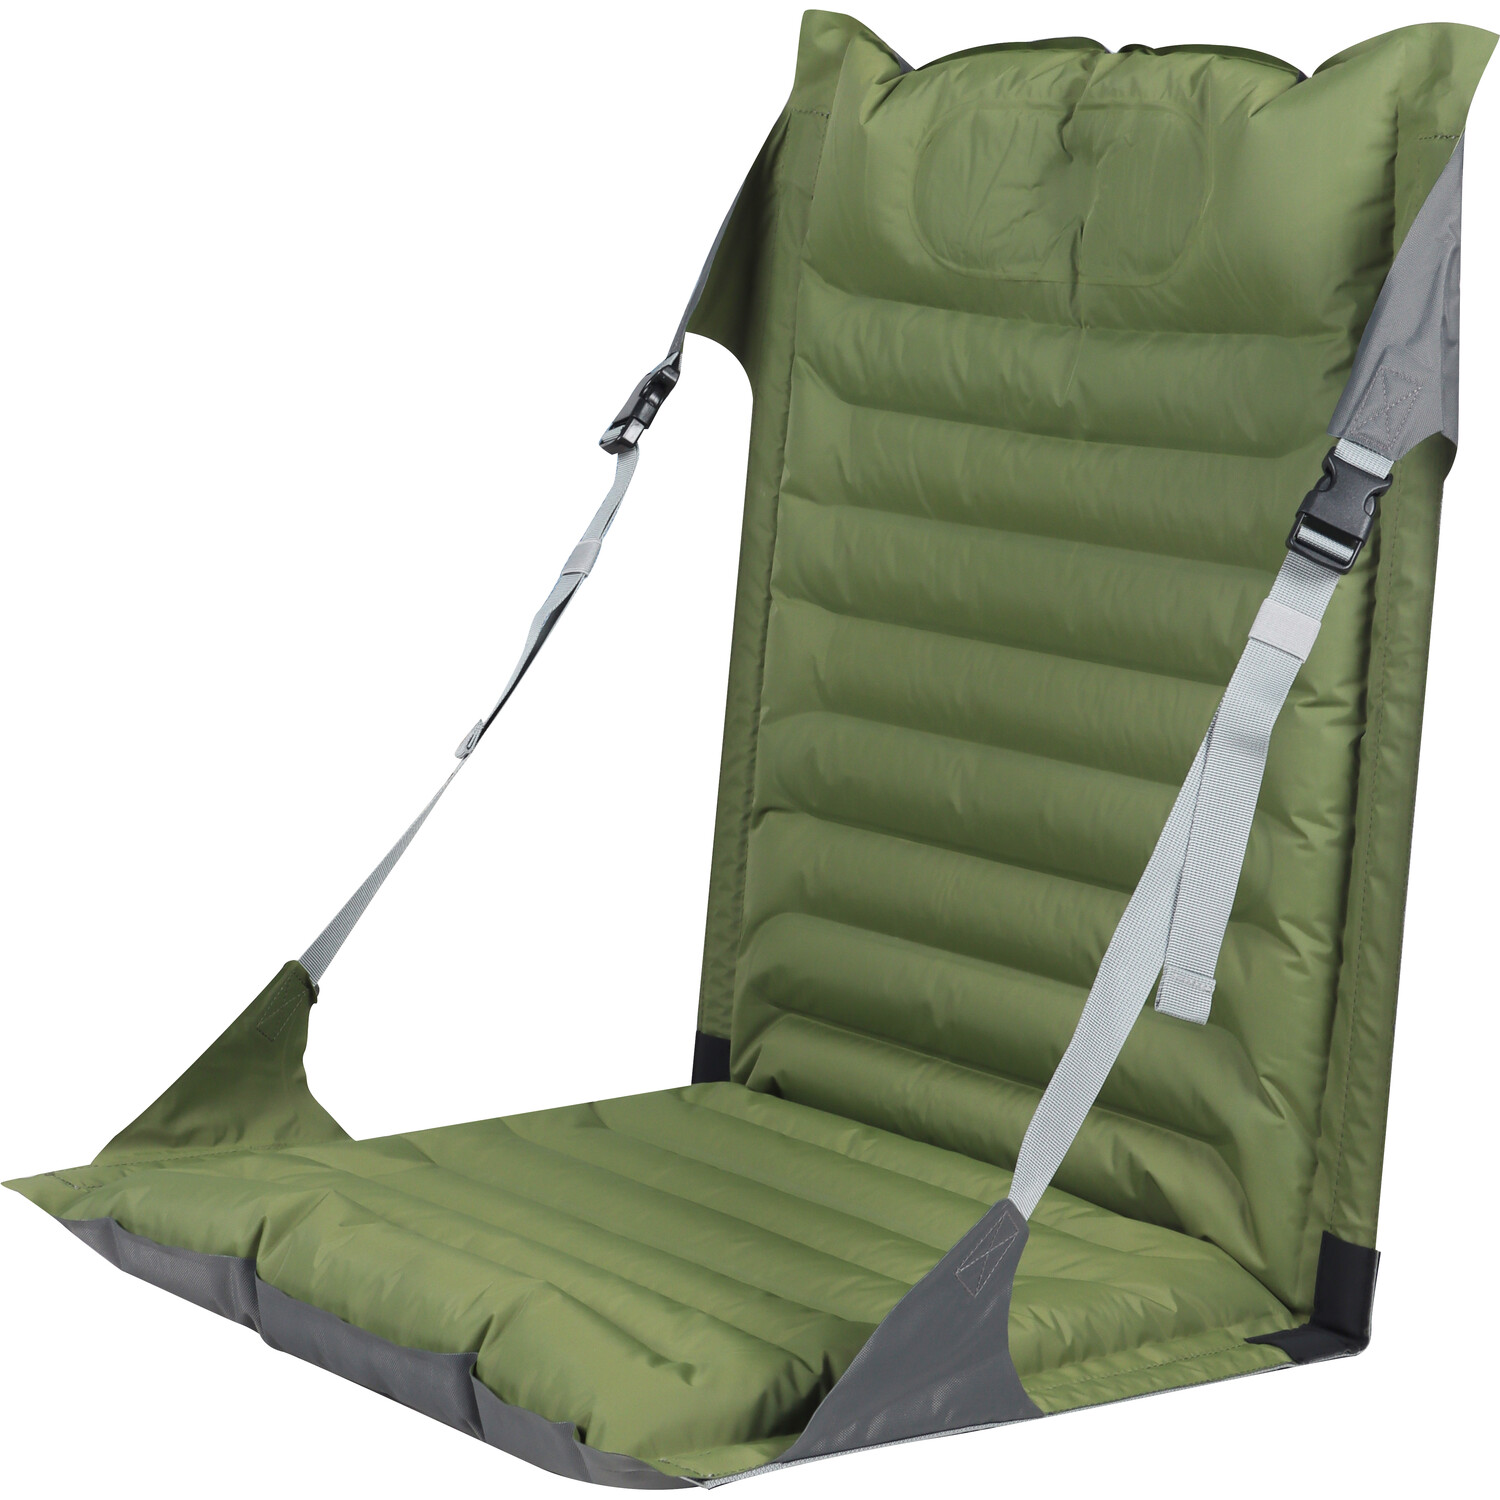 Inflatable chair - Green Image 1